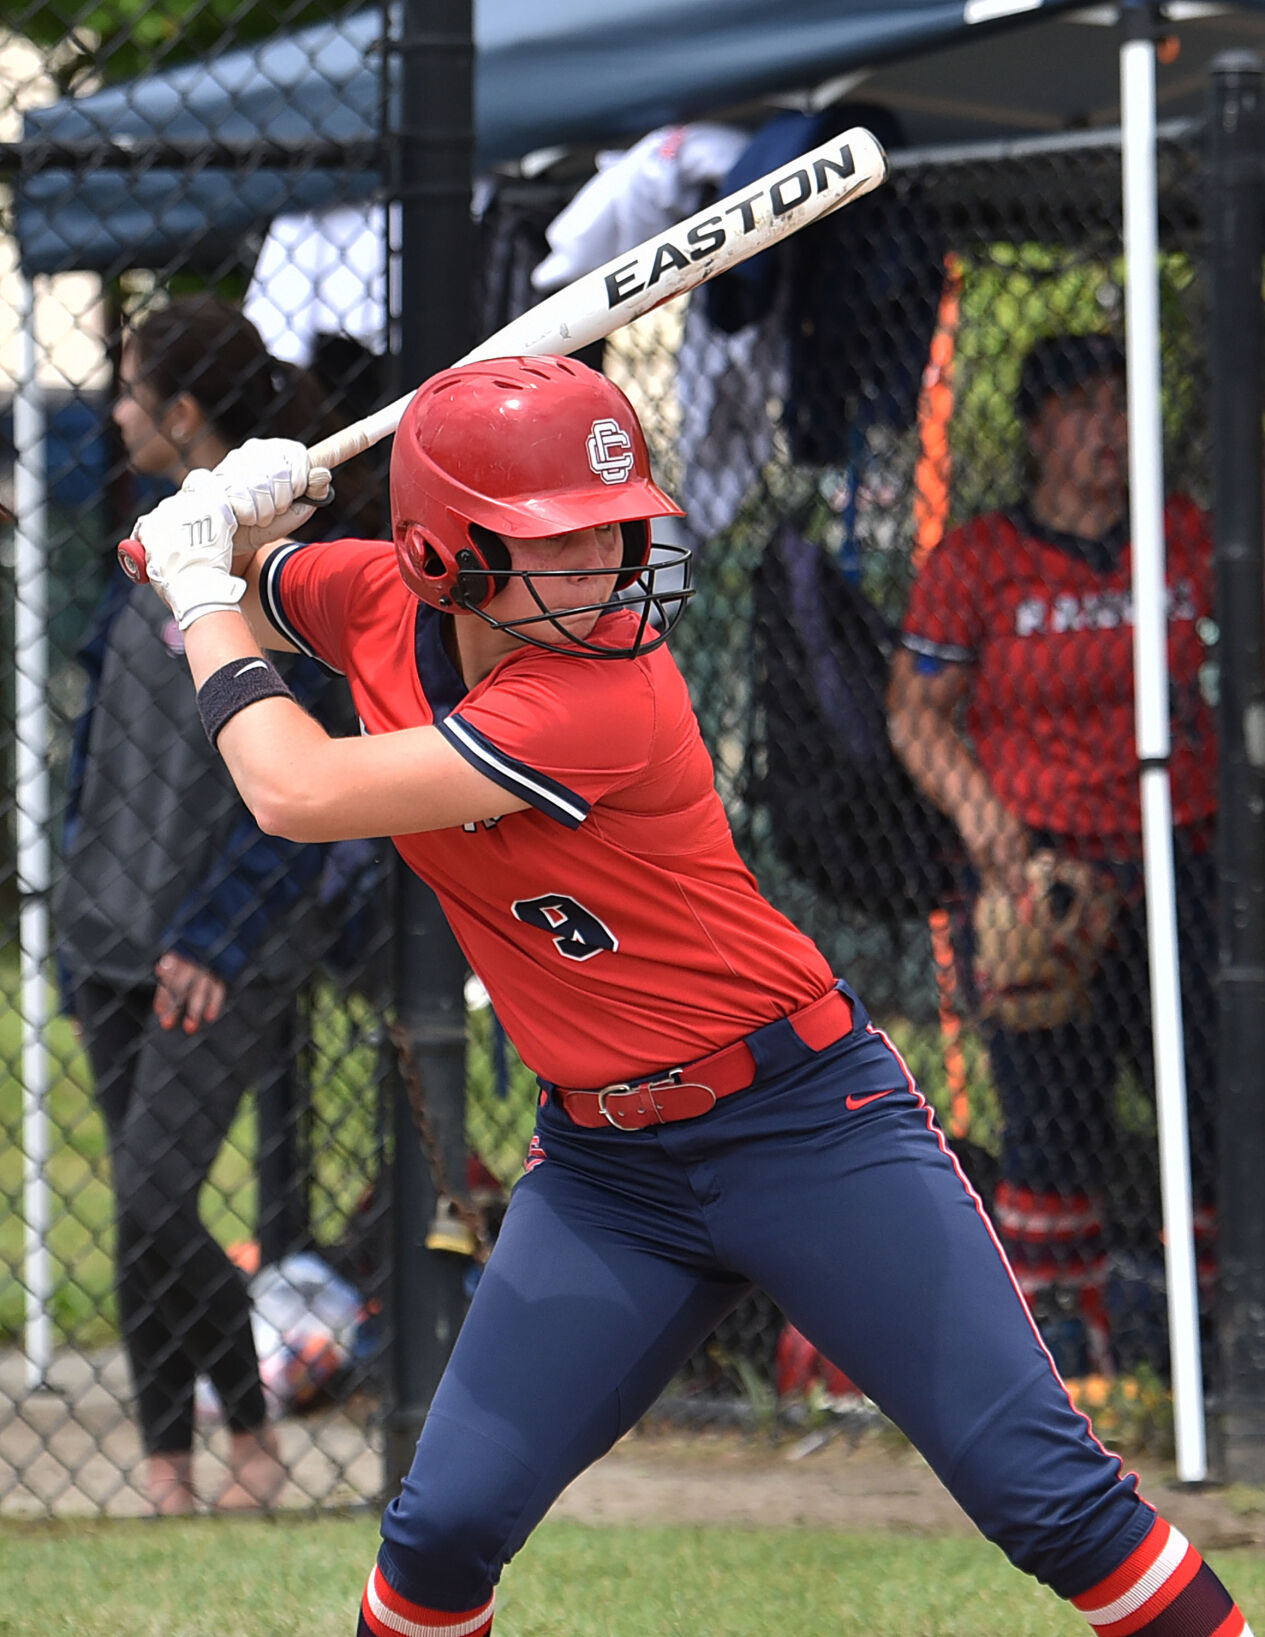 Olivia Moeckel’s Dominant Performance Leads Central Catholic Softball to Victory Over Tewksbury